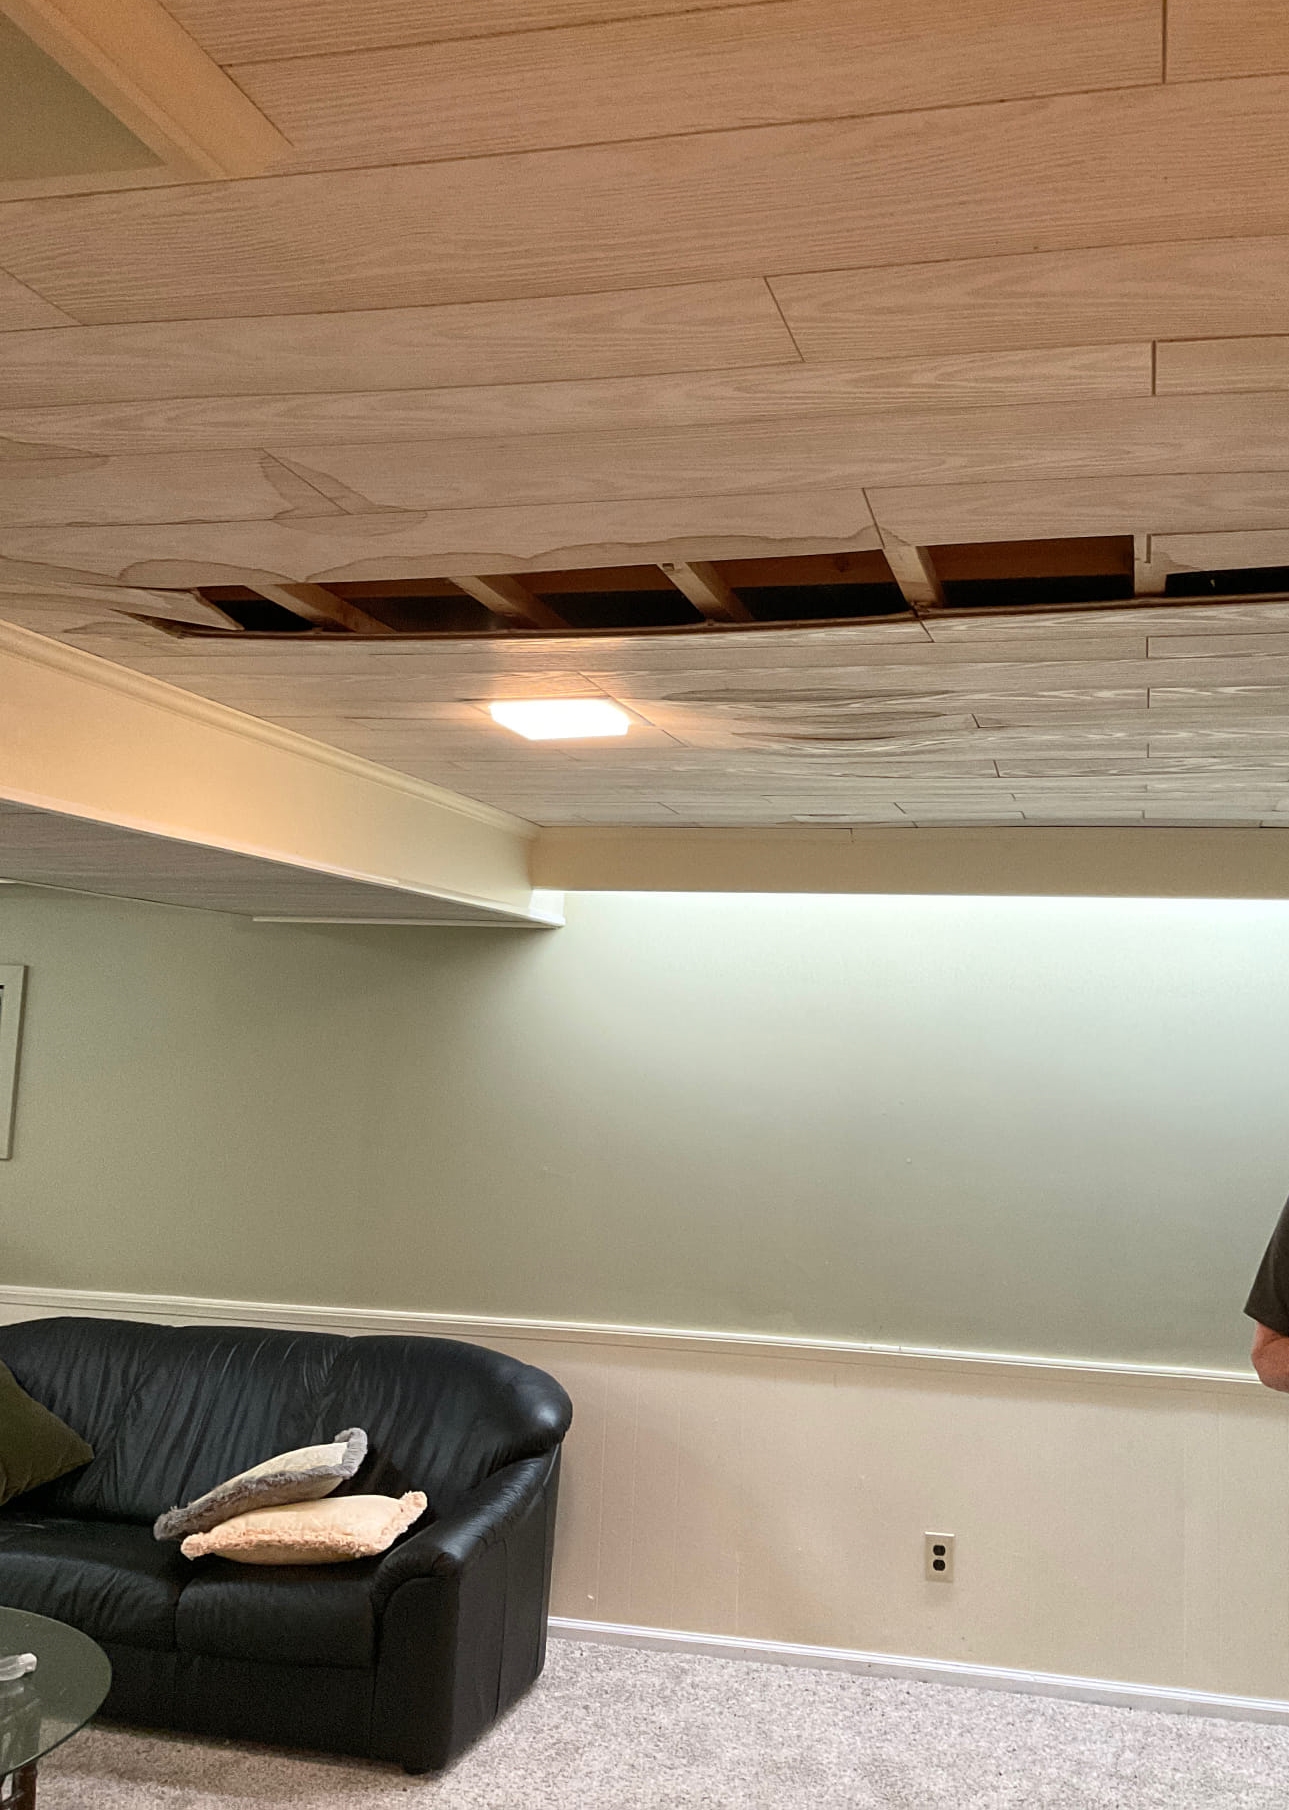 Wet Ceiling from Pipe Leak 